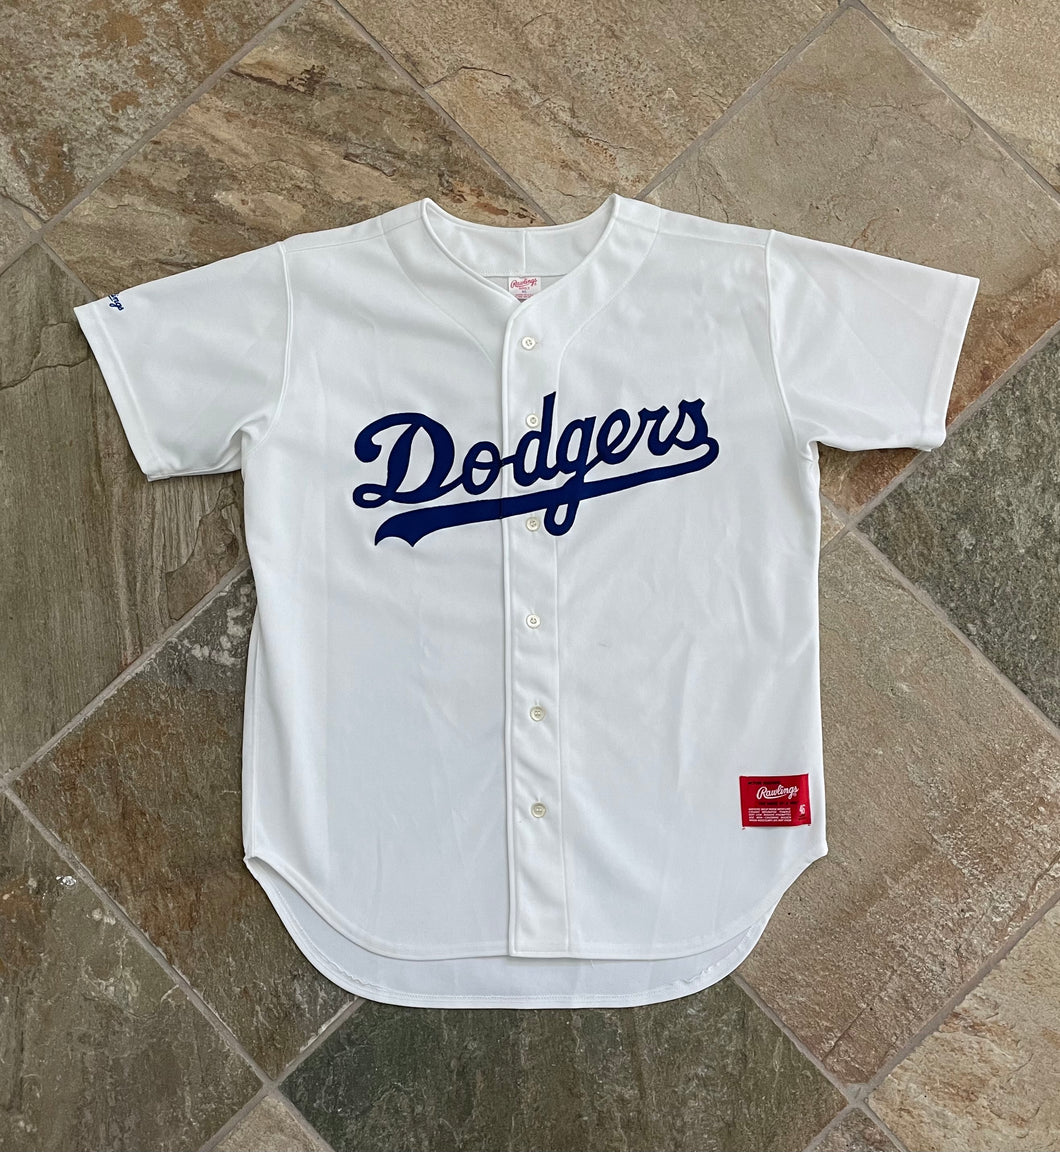 RARE! AUTHENTIC VINTAGE LA DODGERS SAND KNIT JERSEY 90S GREY 46 LARGE  RAWLINGS